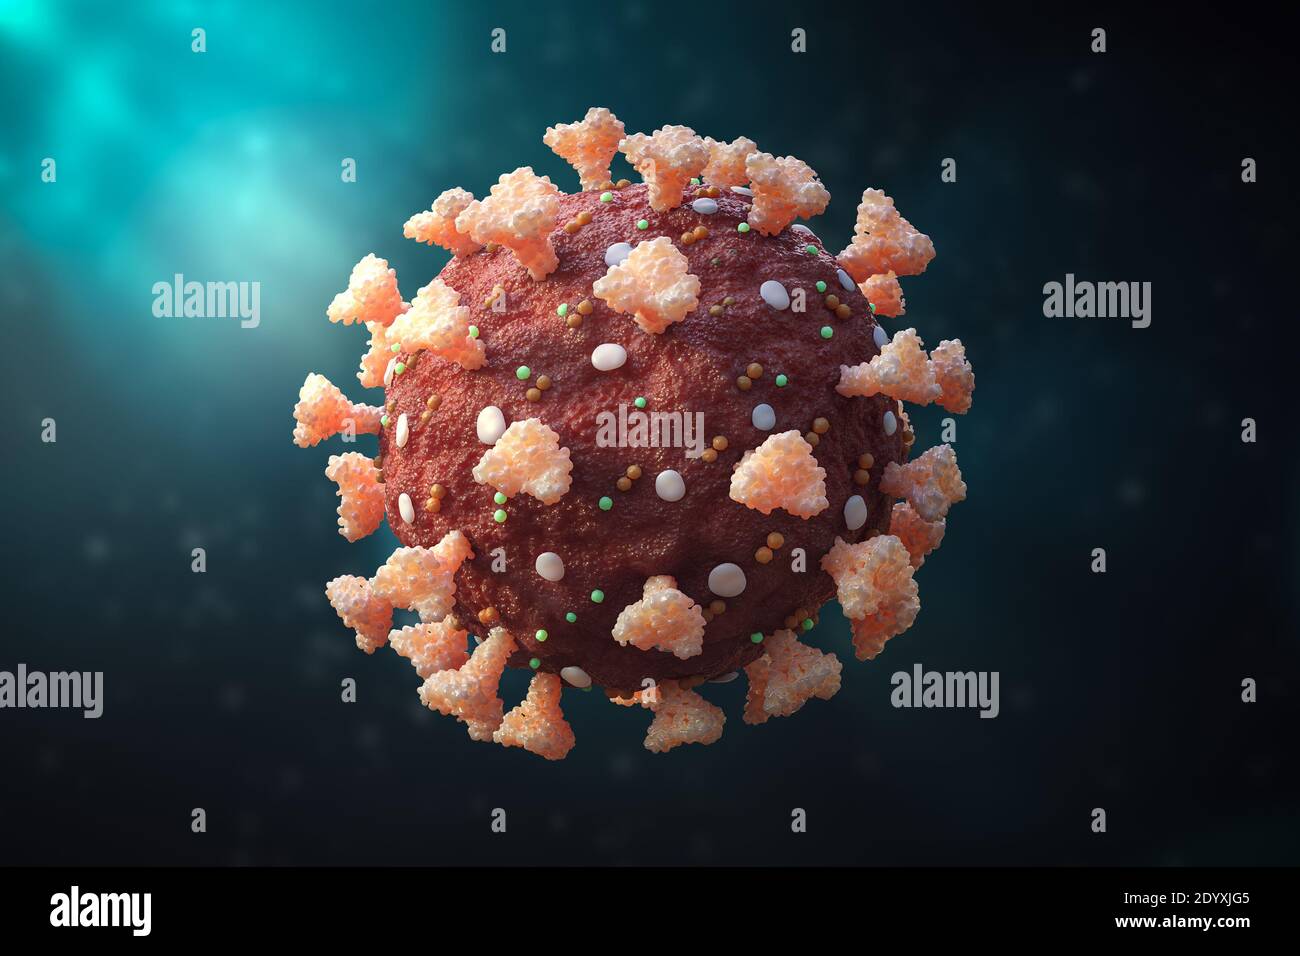 Close-up of a coronavirus or sars-cov-2 cell 3D rendering illustration. Accurate anatomy of the virus. Microbiology, medicine, science, virology conce Stock Photo